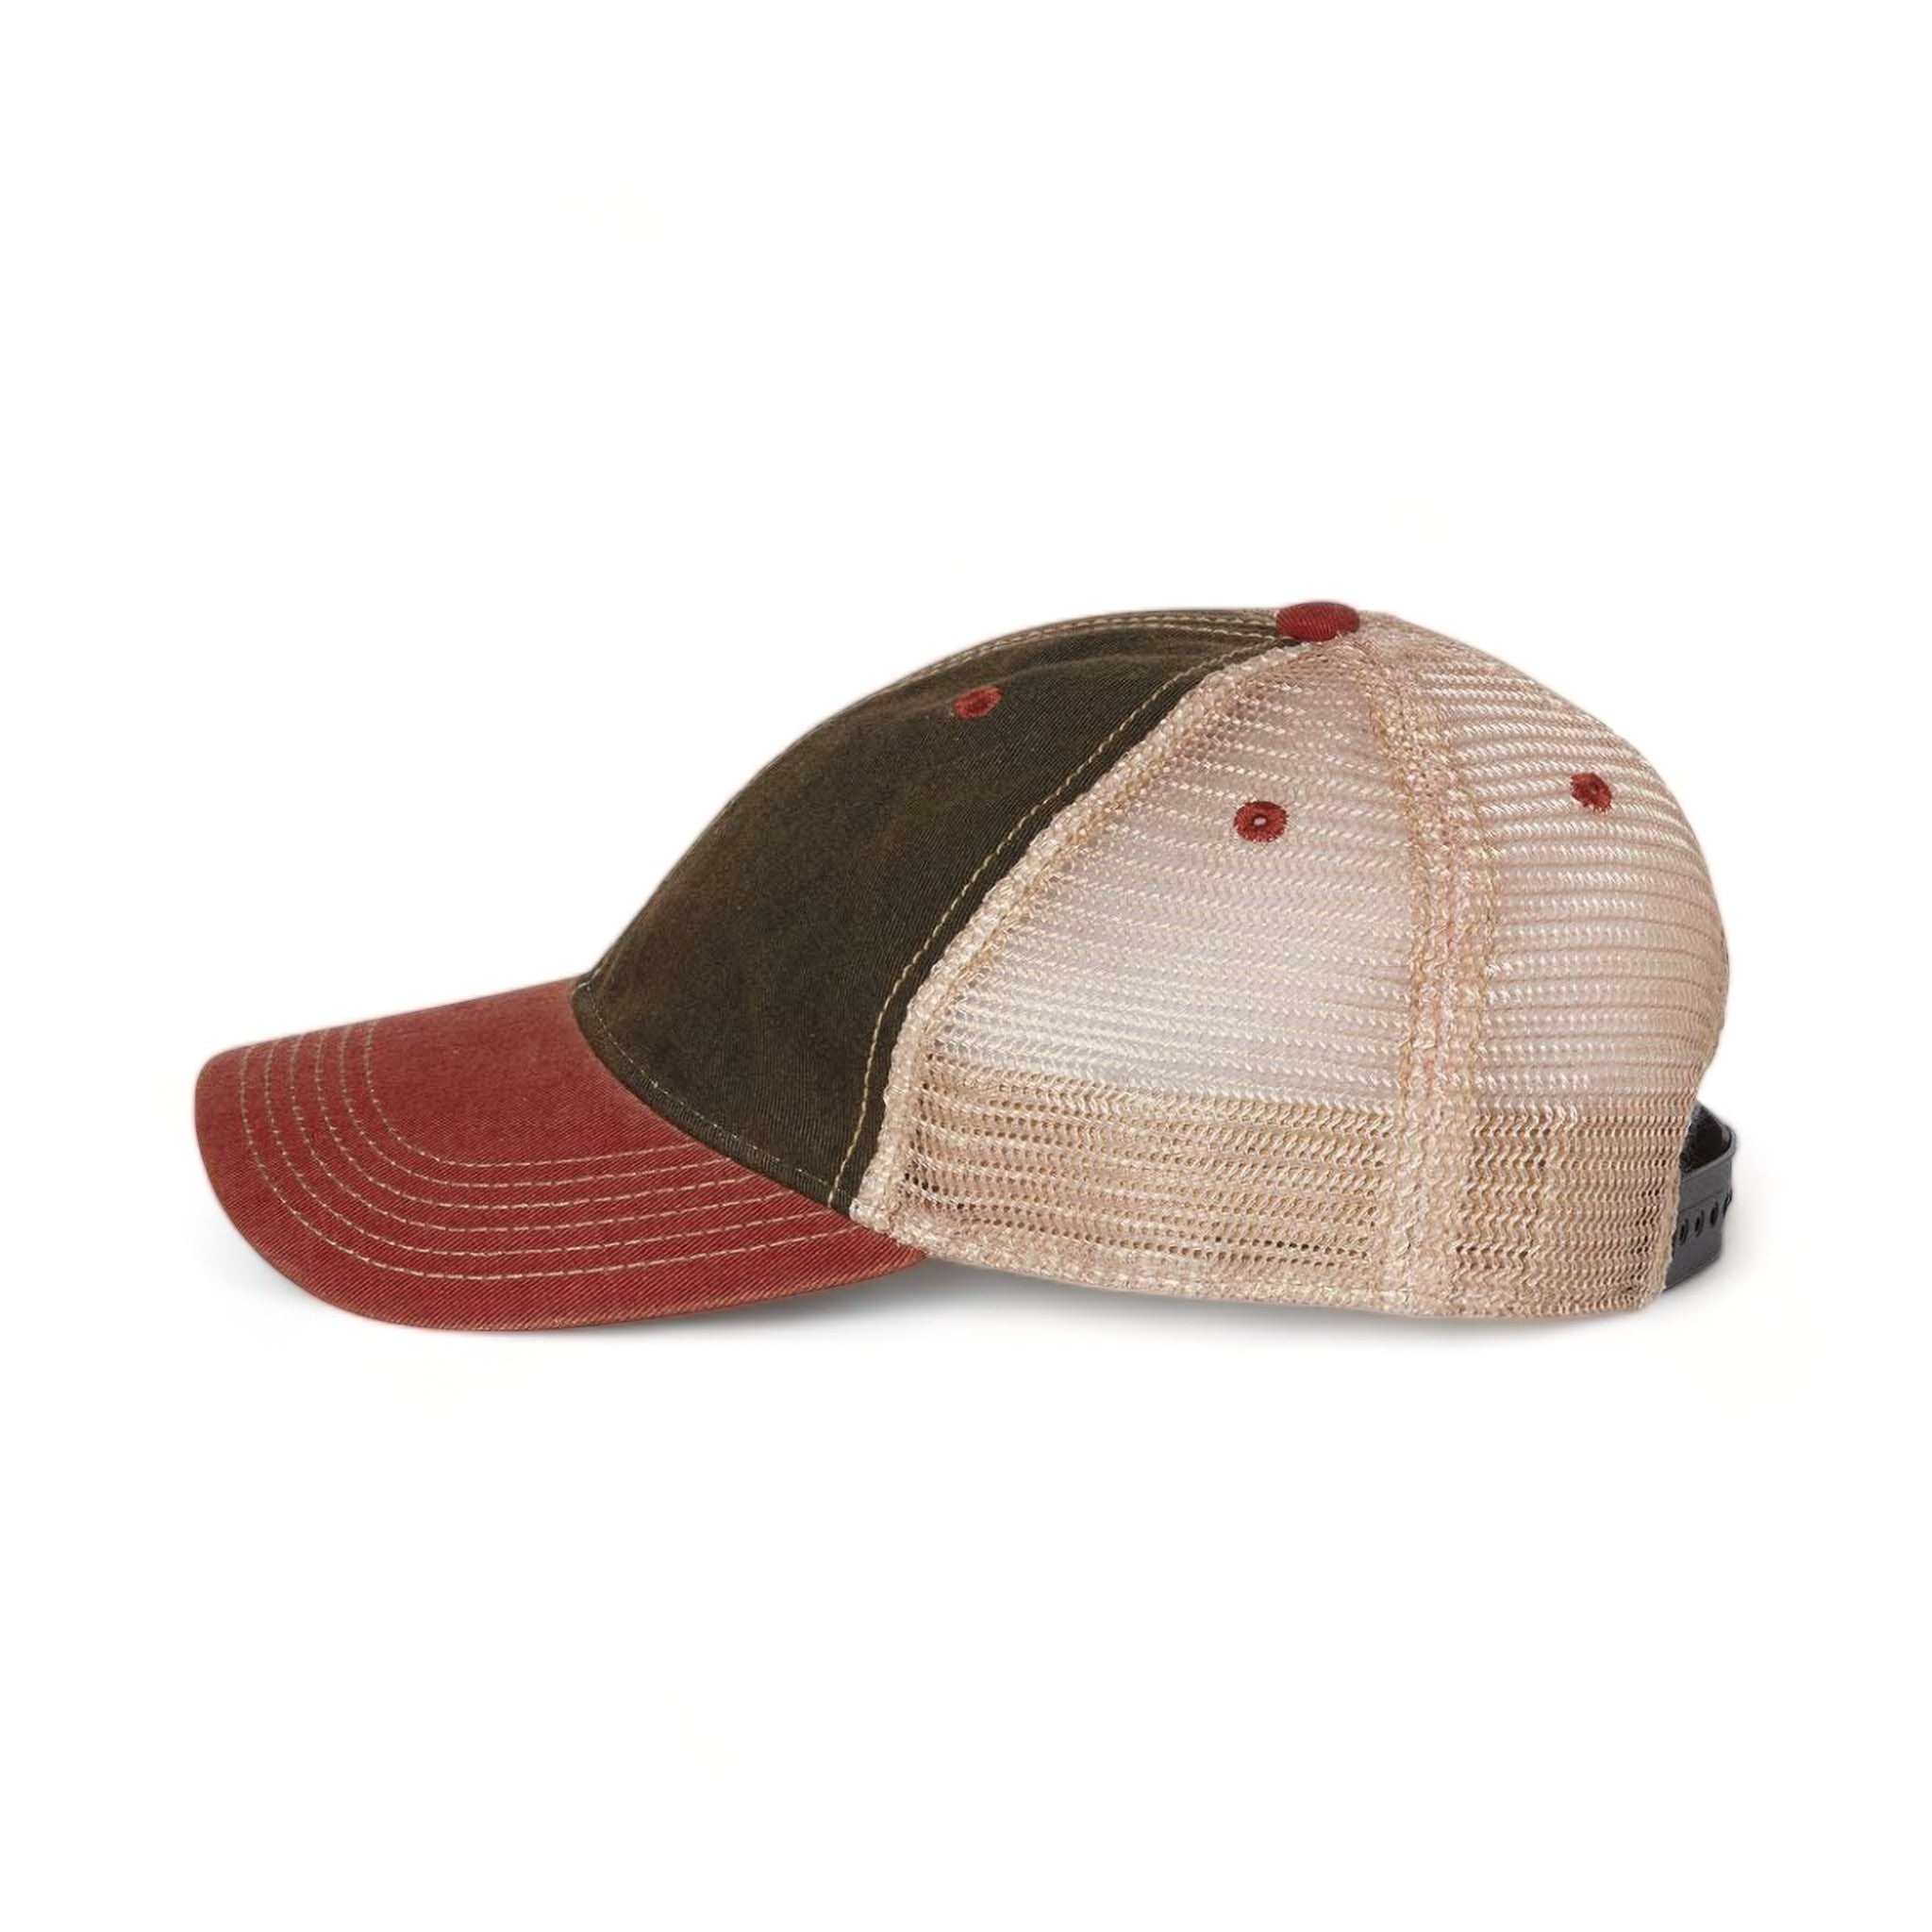 Side view of LEGACY OFA custom hat in black, cardinal and khaki